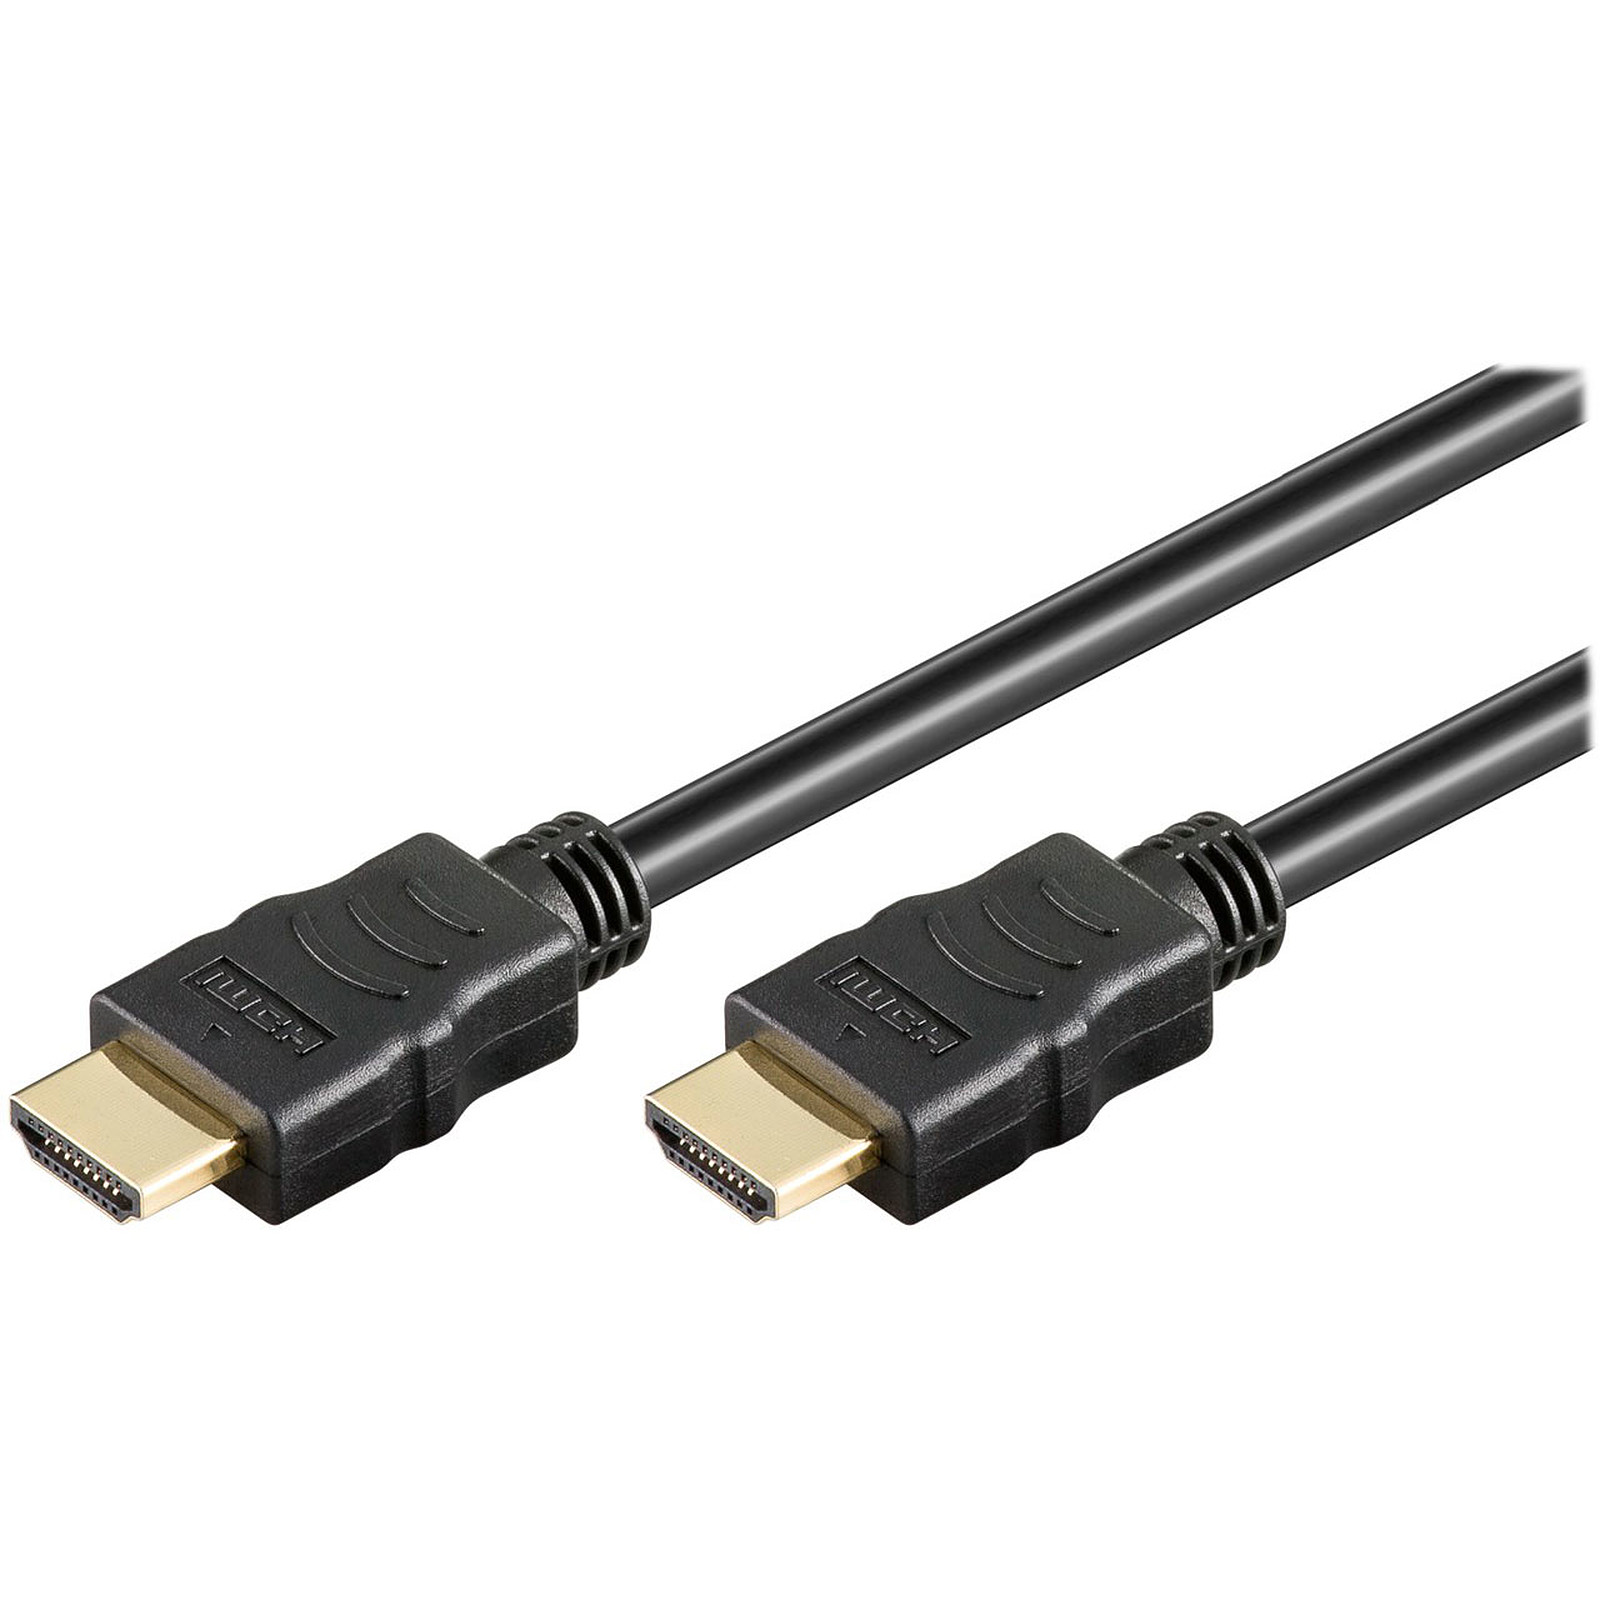 Goobay High Speed HDMI Cable with Ethernet (7.5 m) - HDMI Goobay